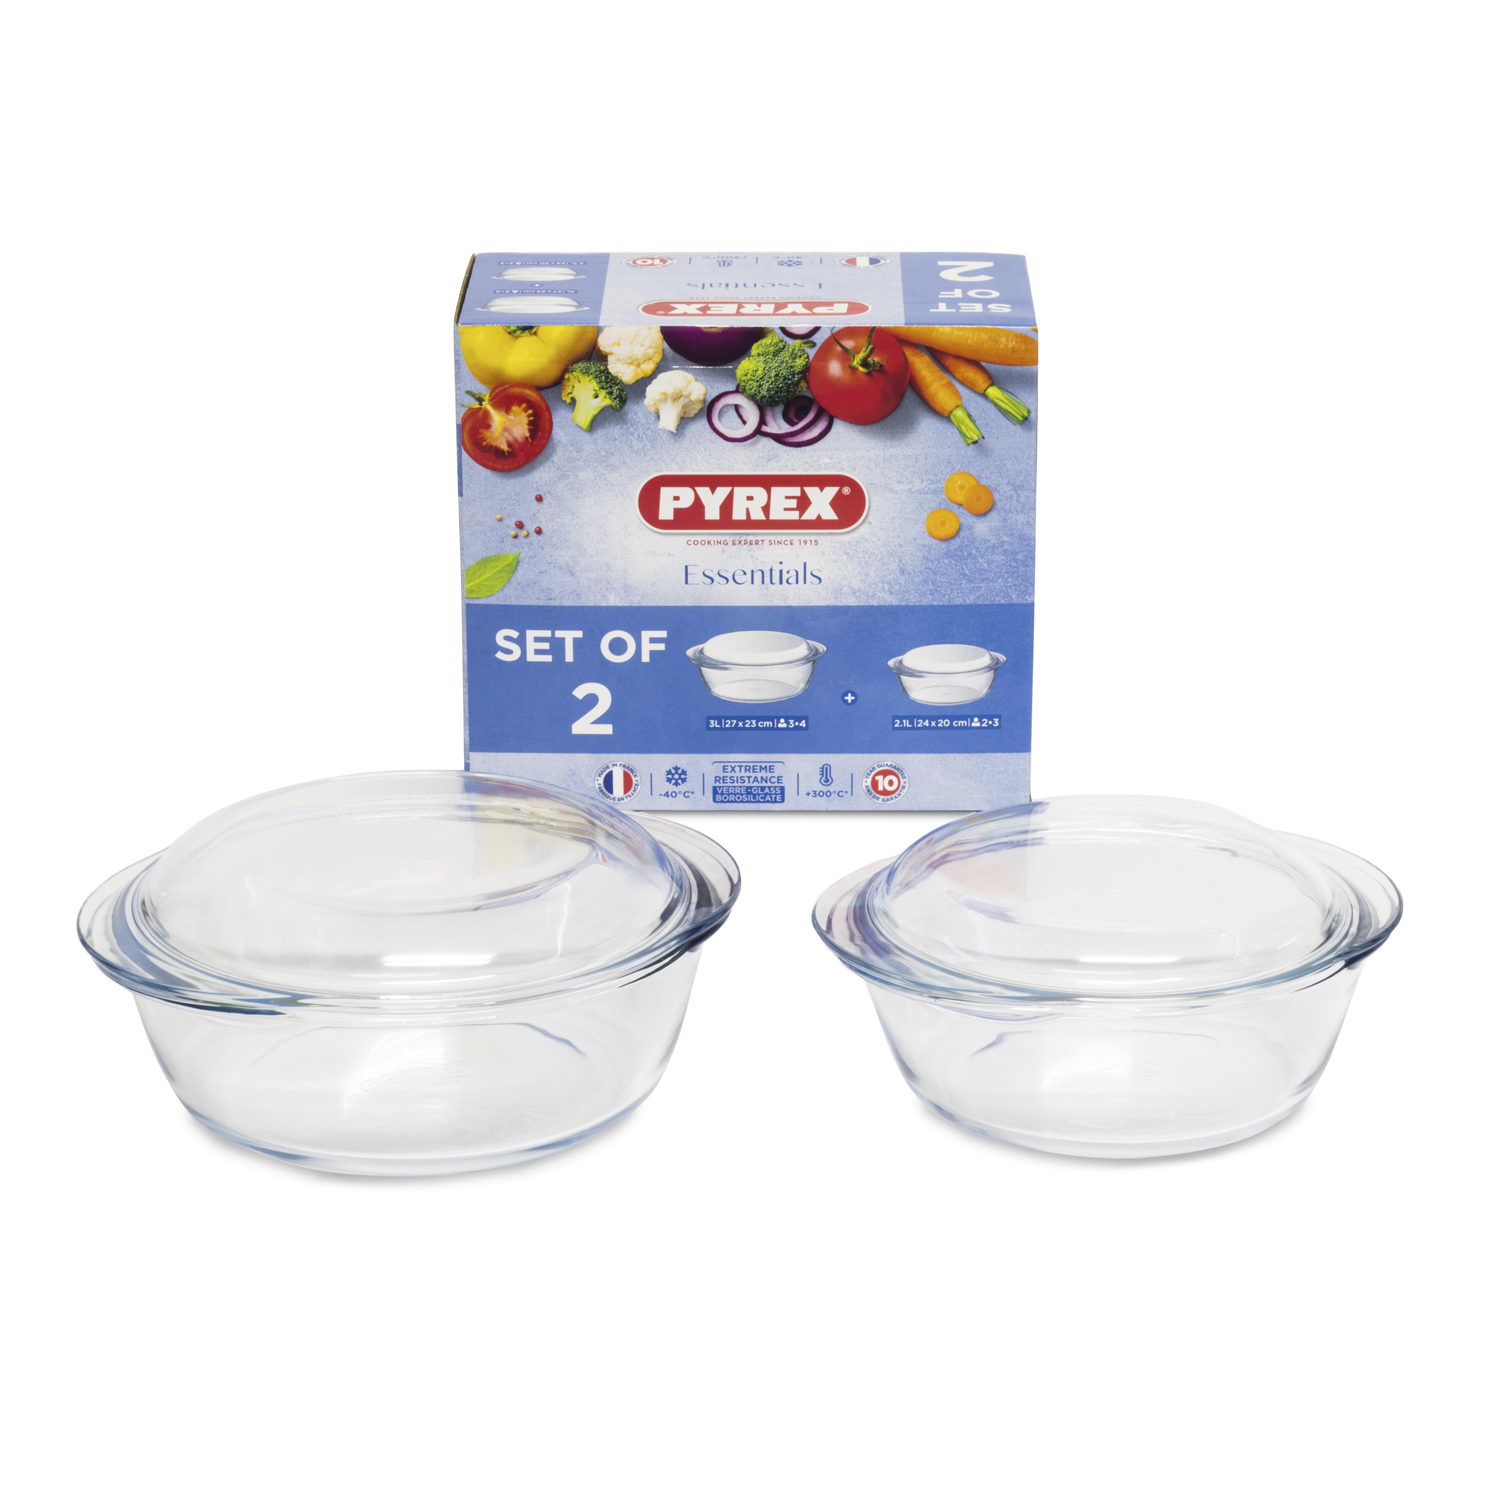 Pyrex cookware with glass lids